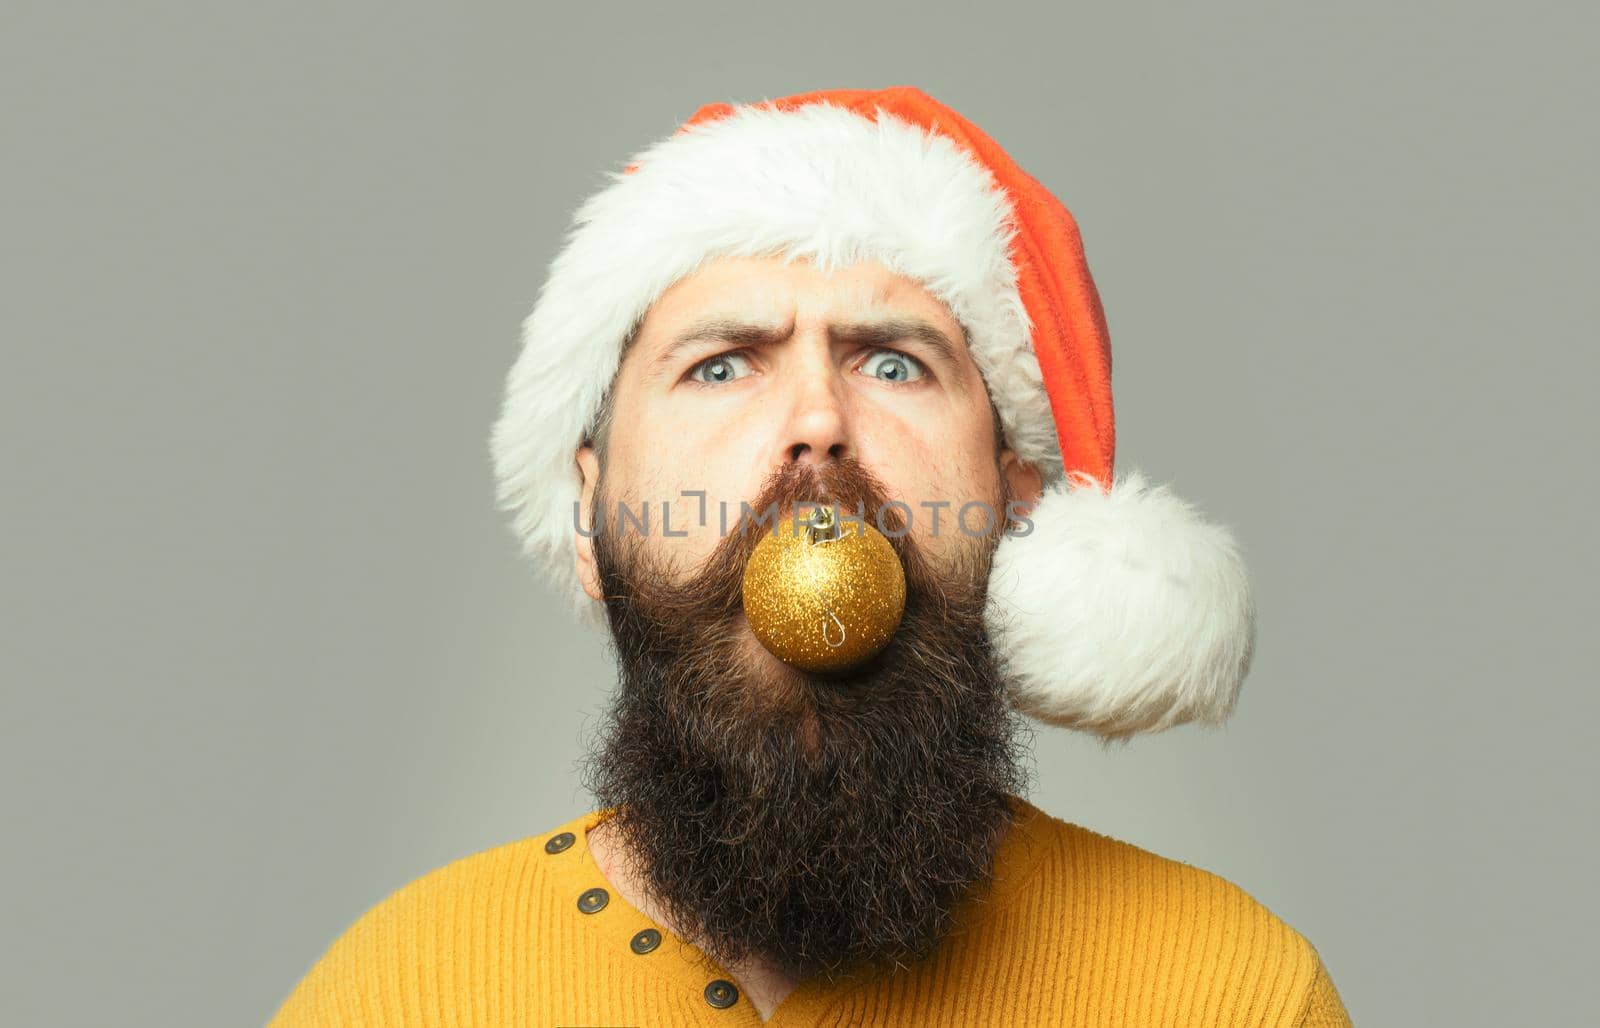 Crazy man with long beard and moustache on serious face with Christmas ball in mouth on grey background. Closeup funny face portrait.